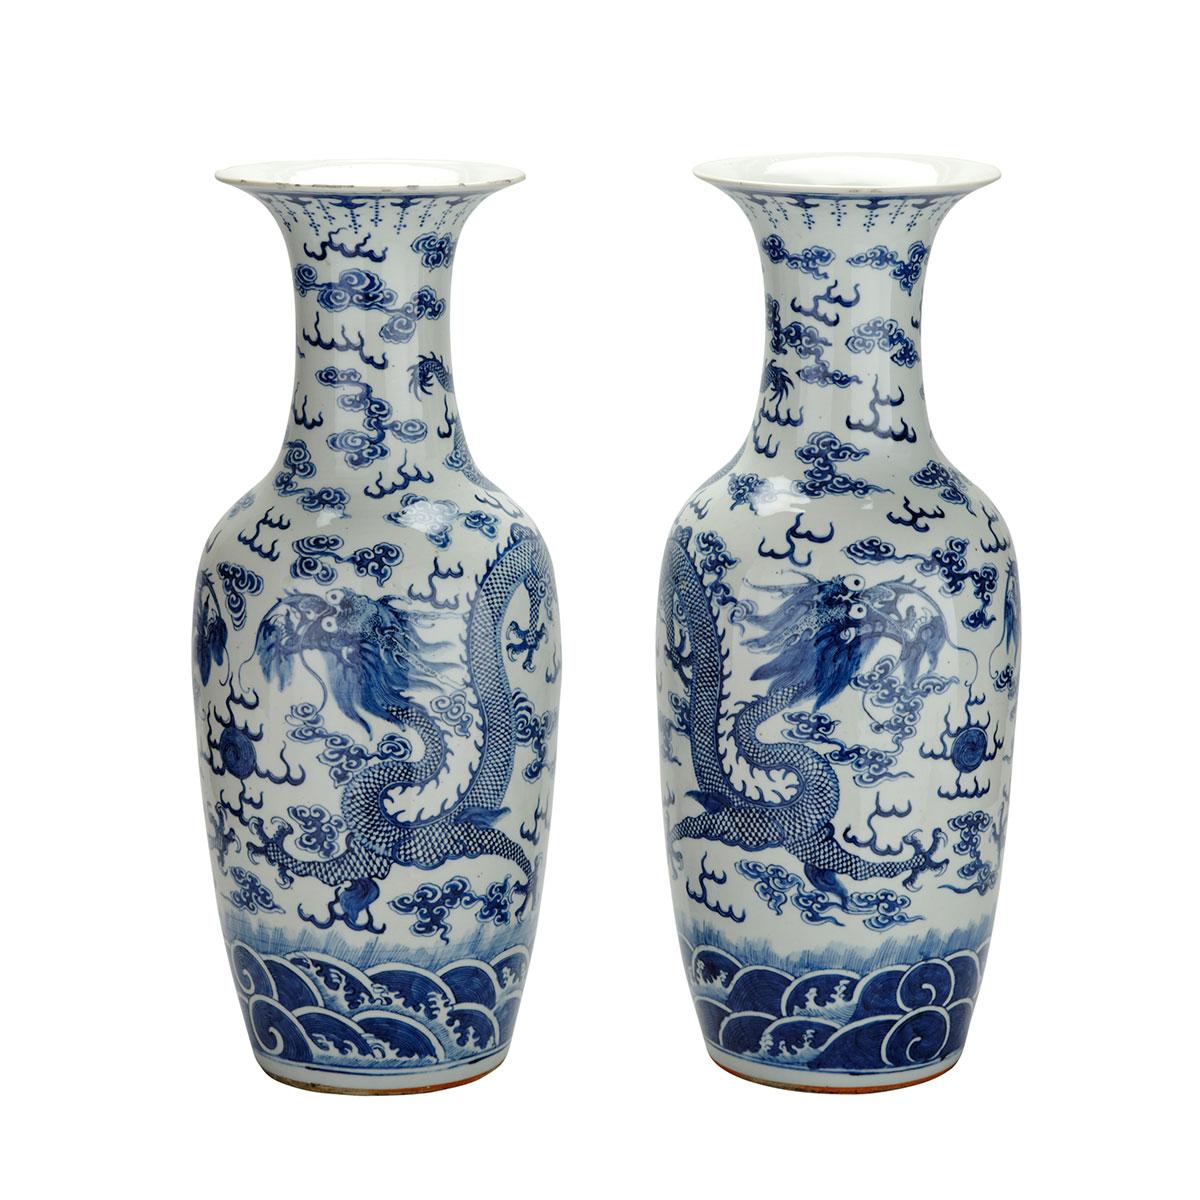 Pair of Large Blue and White Dragon Vases, 19th Century